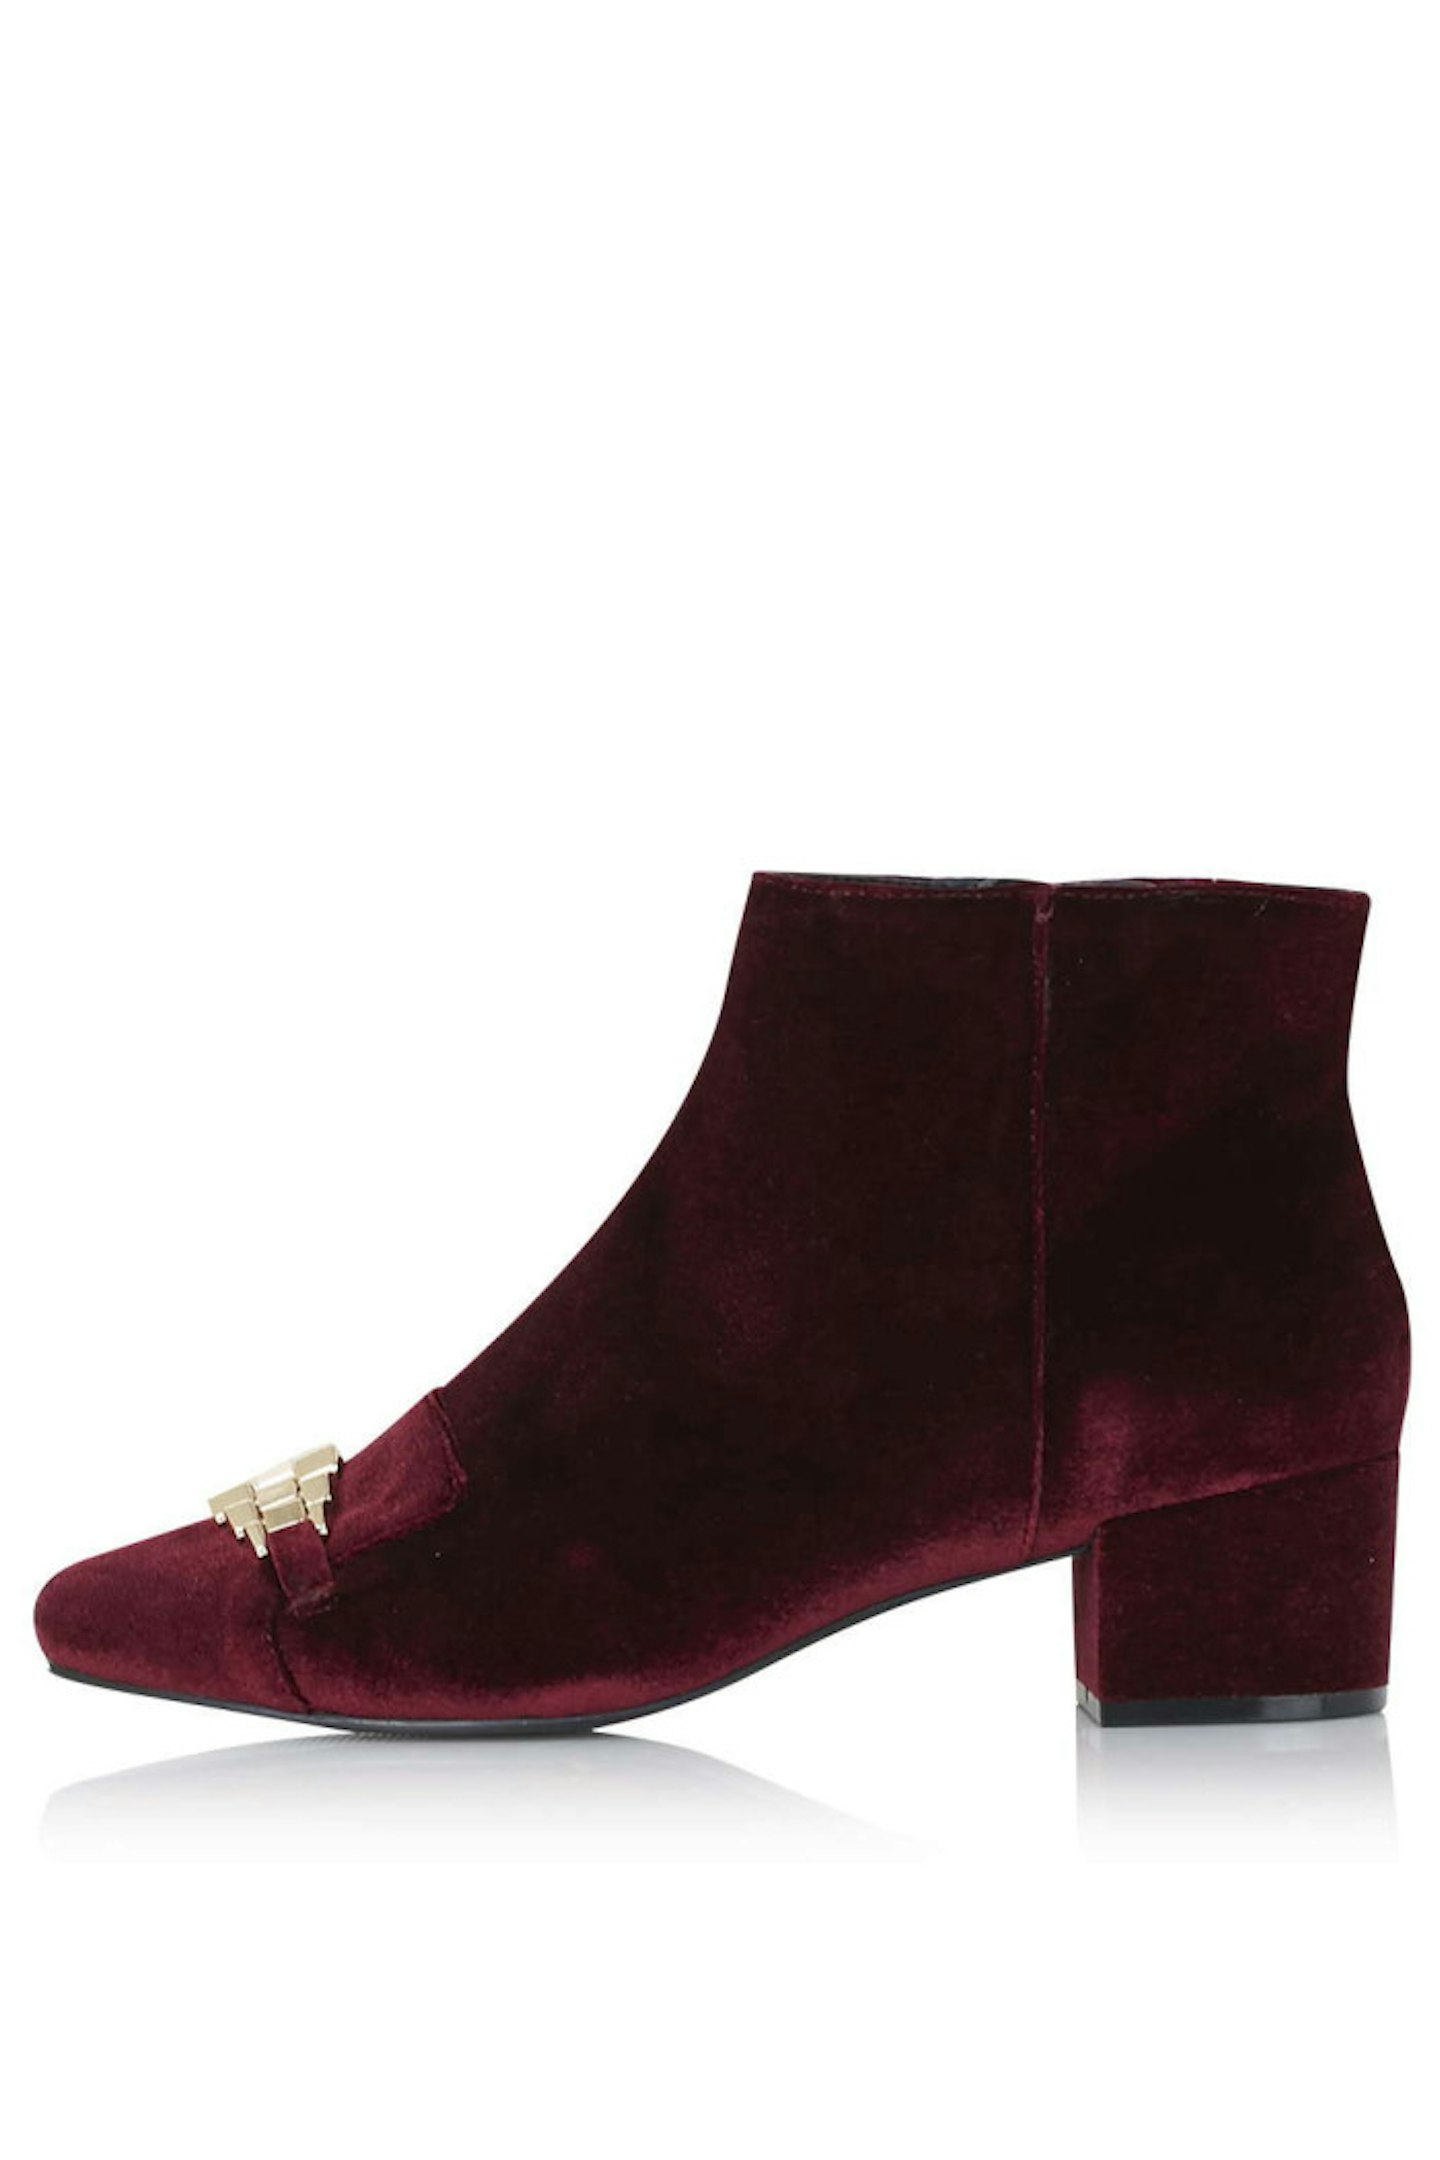 What's not to love about a burgundy boot? We want to wear these with black skinny jeans and an oversized blazer.